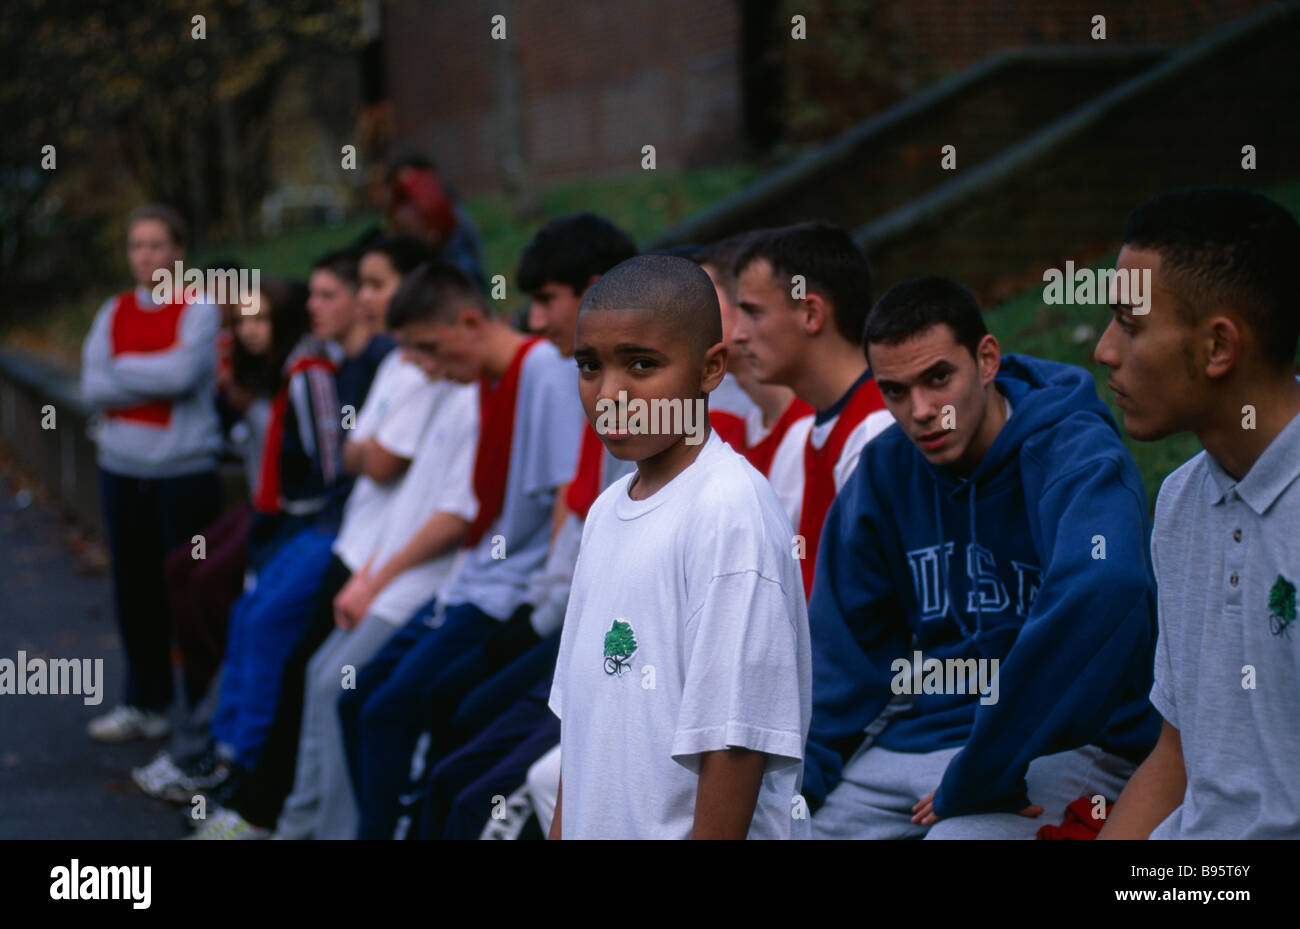 ENGLAND London Mixed race PE class pupils from comprehensive school in St John’s Wood. Stock Photo